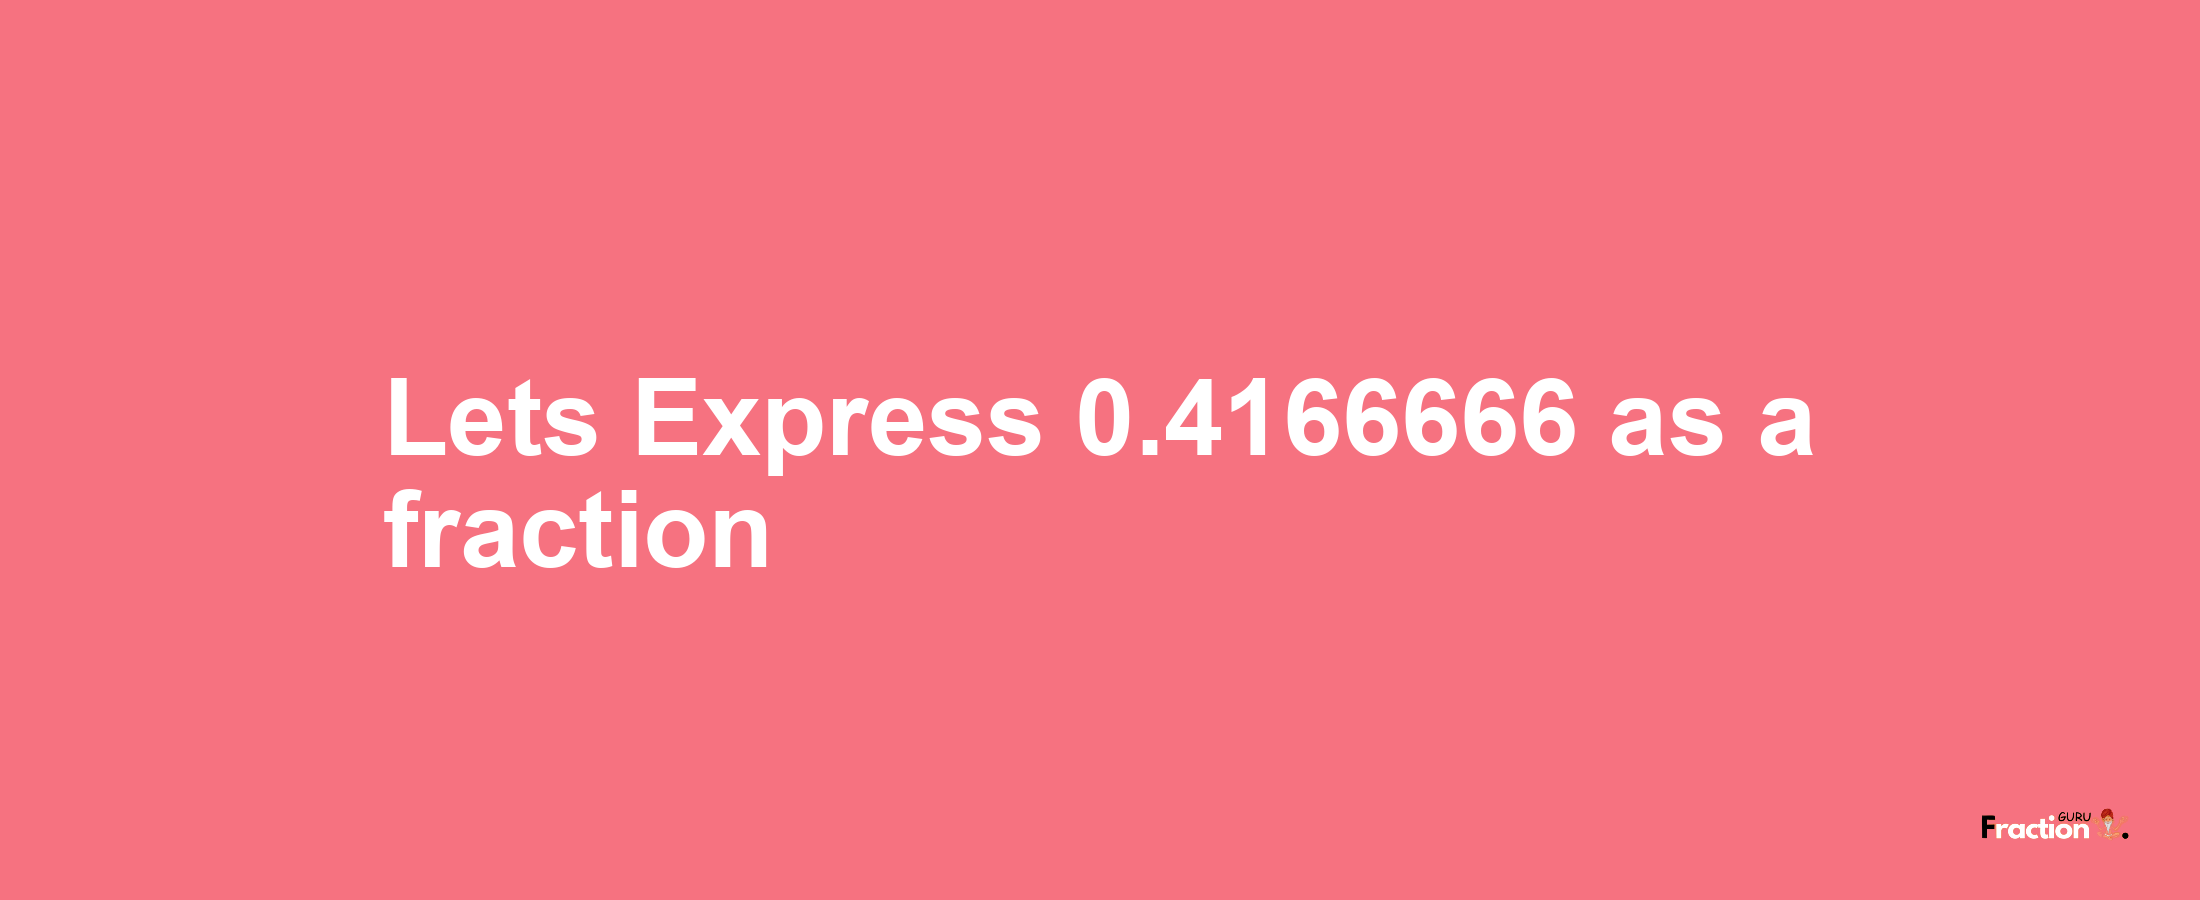 Lets Express 0.4166666 as afraction